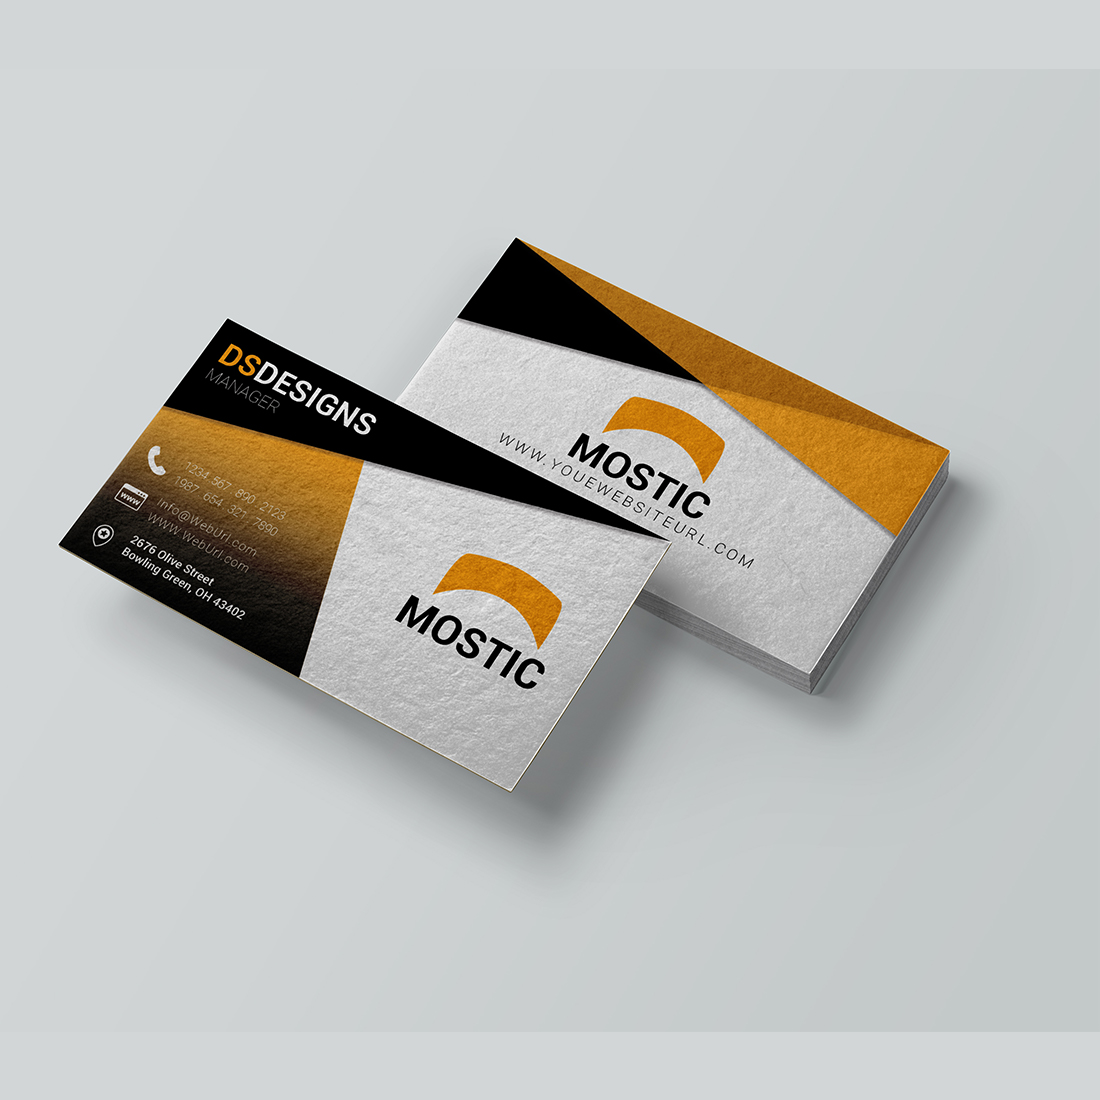 Two business cards with a black and yellow design.